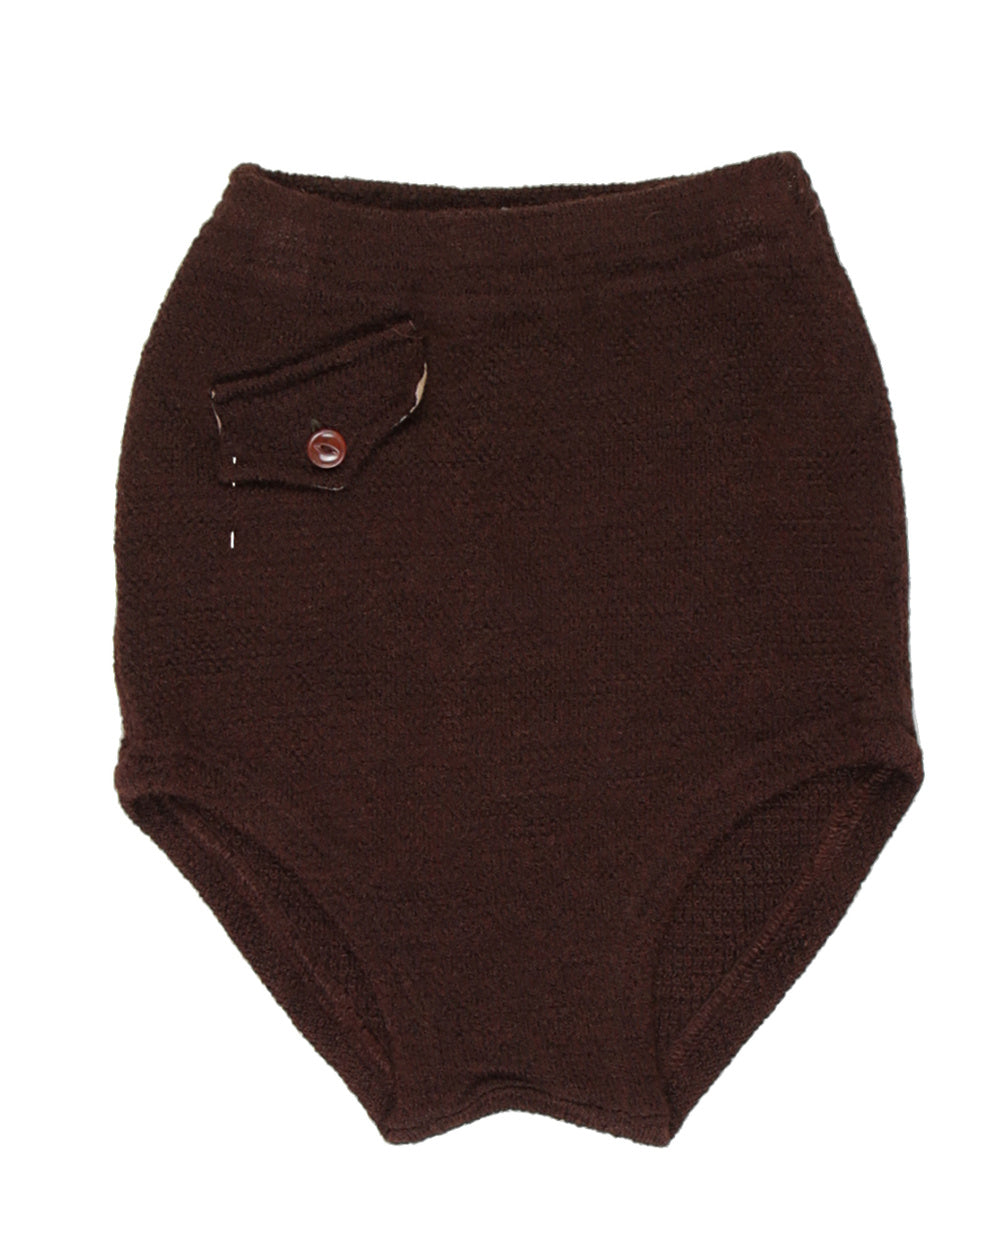 40s Brown Knitted Swim Shorts - XS